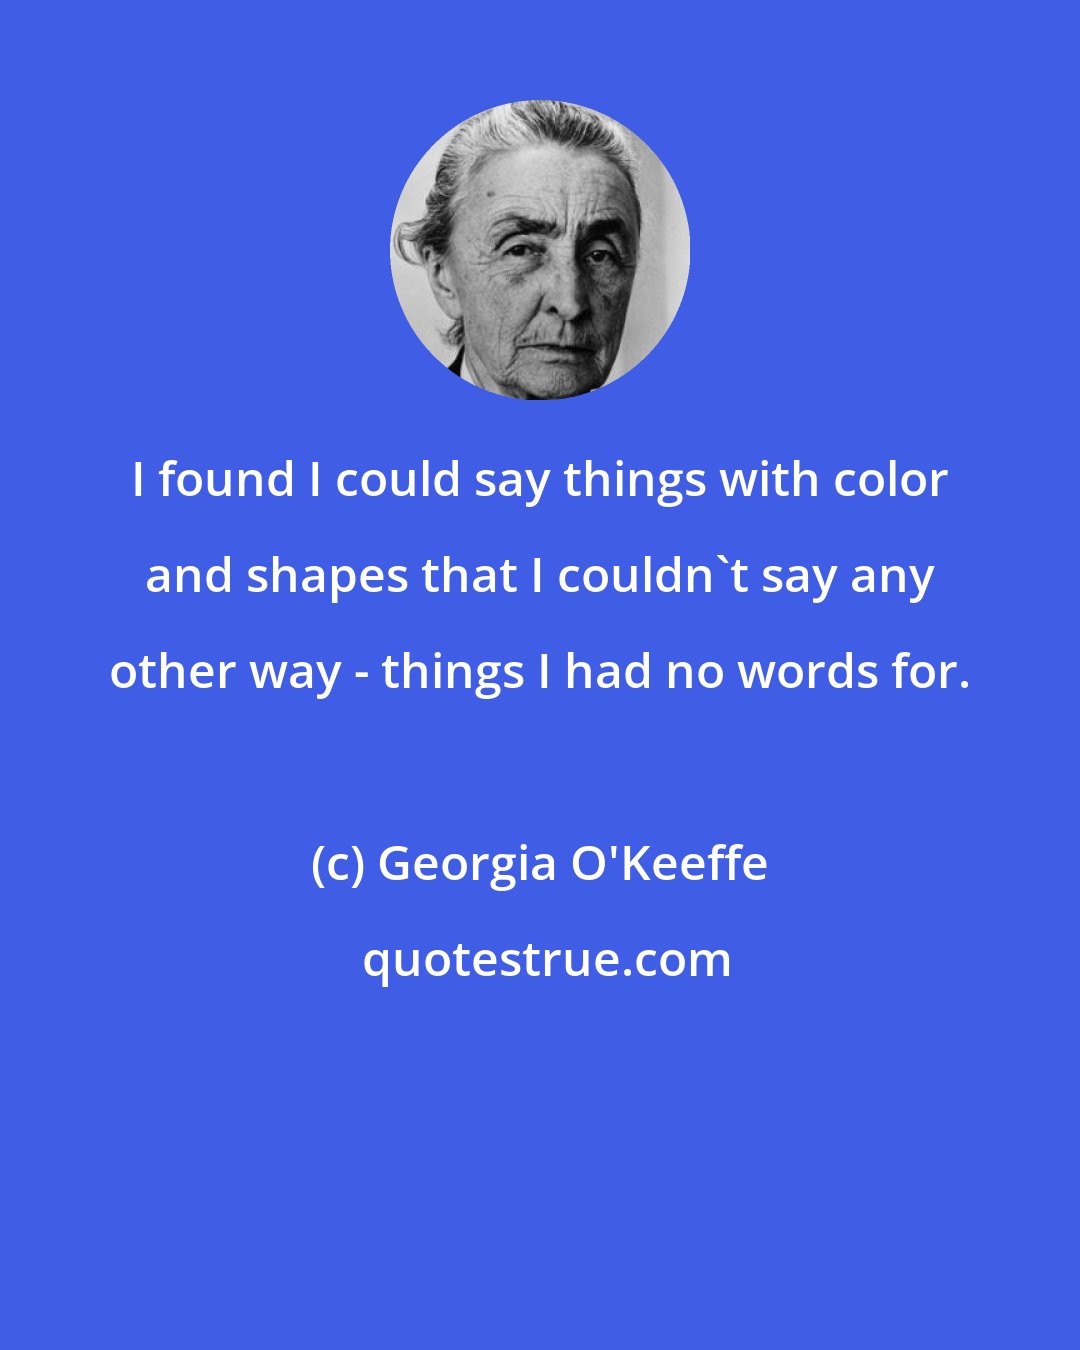 Georgia O'Keeffe: I found I could say things with color and shapes that I couldn't say any other way - things I had no words for.